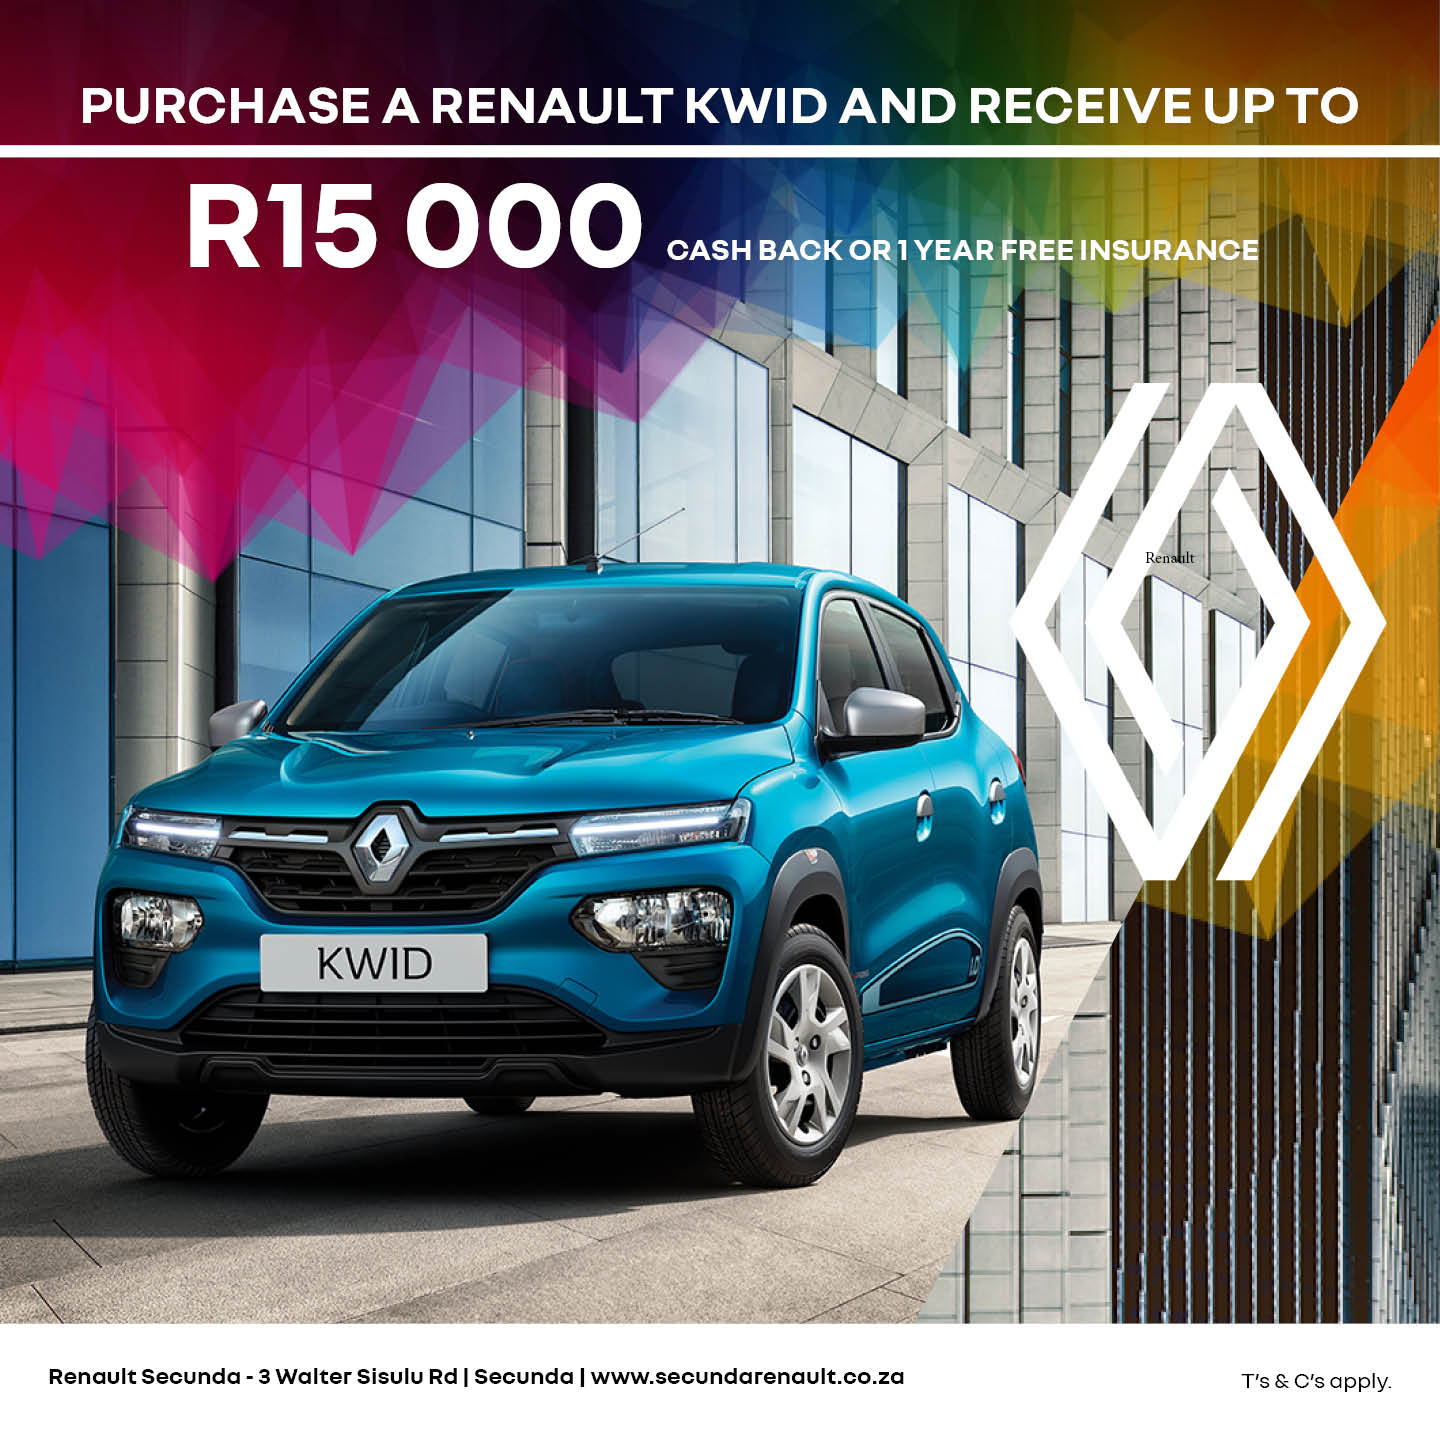 Stop Kwiddi’n around and get yourself a KWID image from 